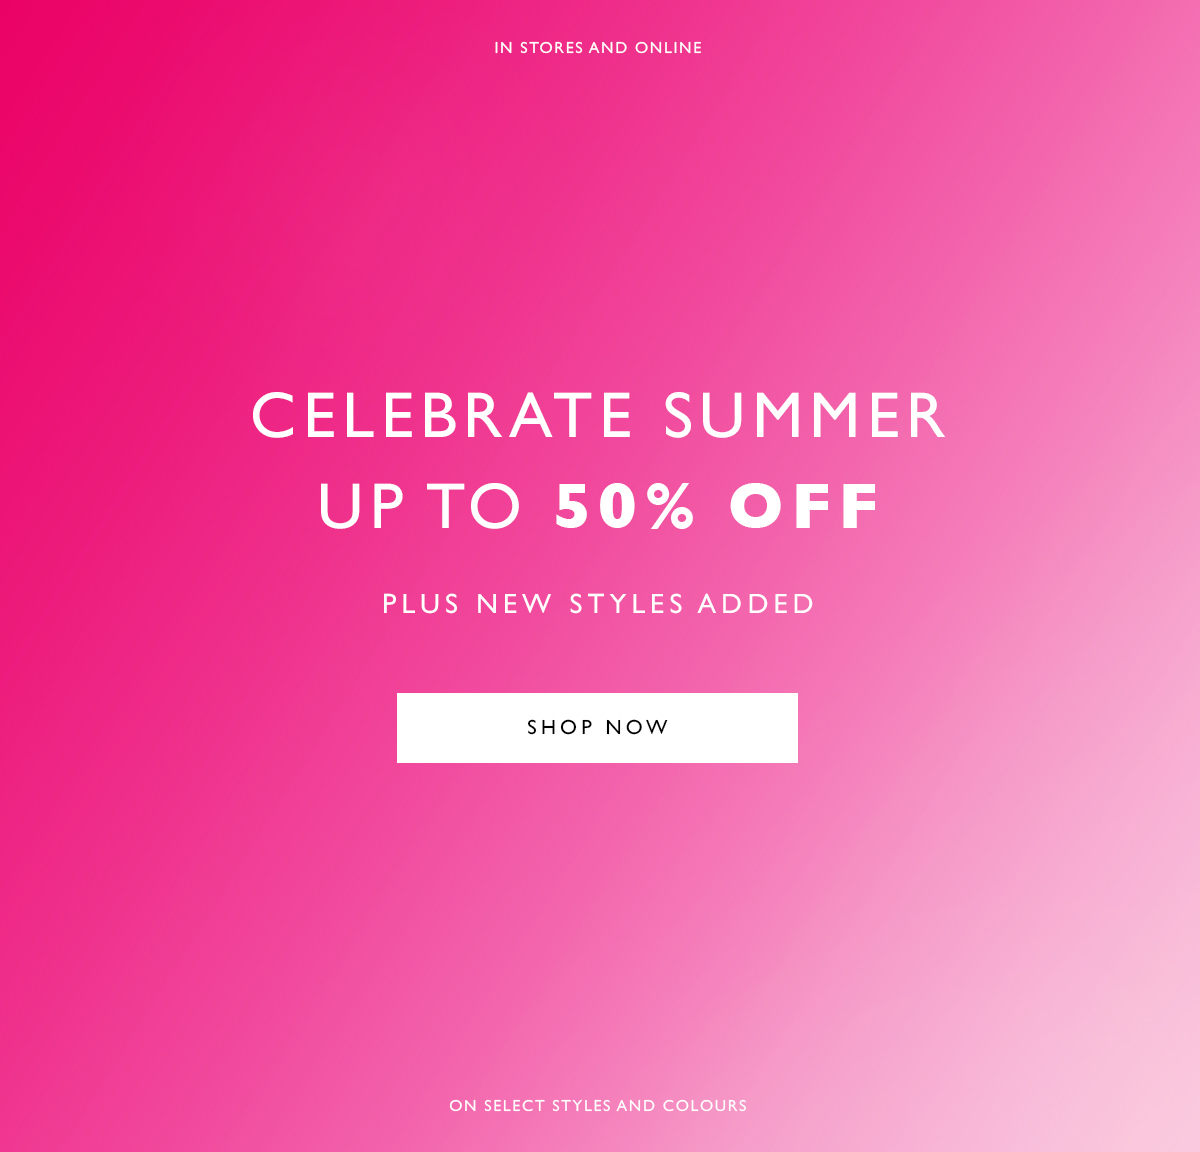 Celebrate Summer up to 50% off. Plus new styles added. SHOP NOW